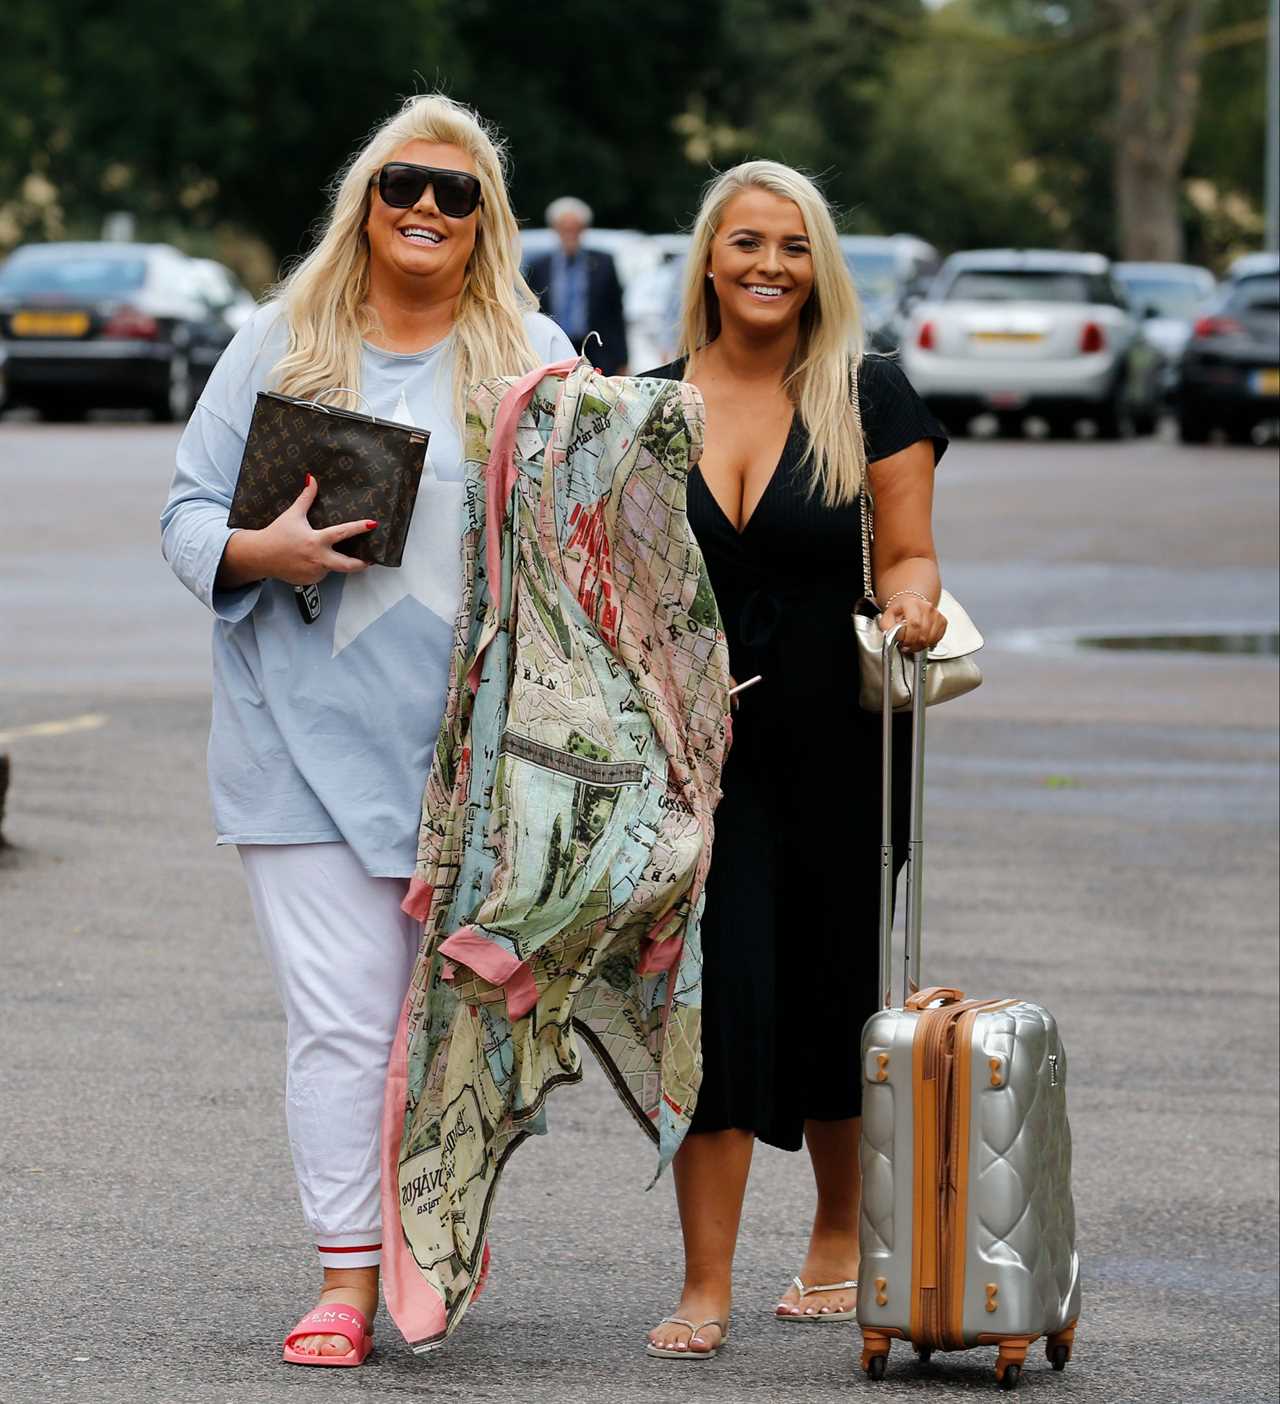 Gemma Collins slammed as ‘unhappy’ and ‘bored’ by Towie co-star and former pal as feud heats up